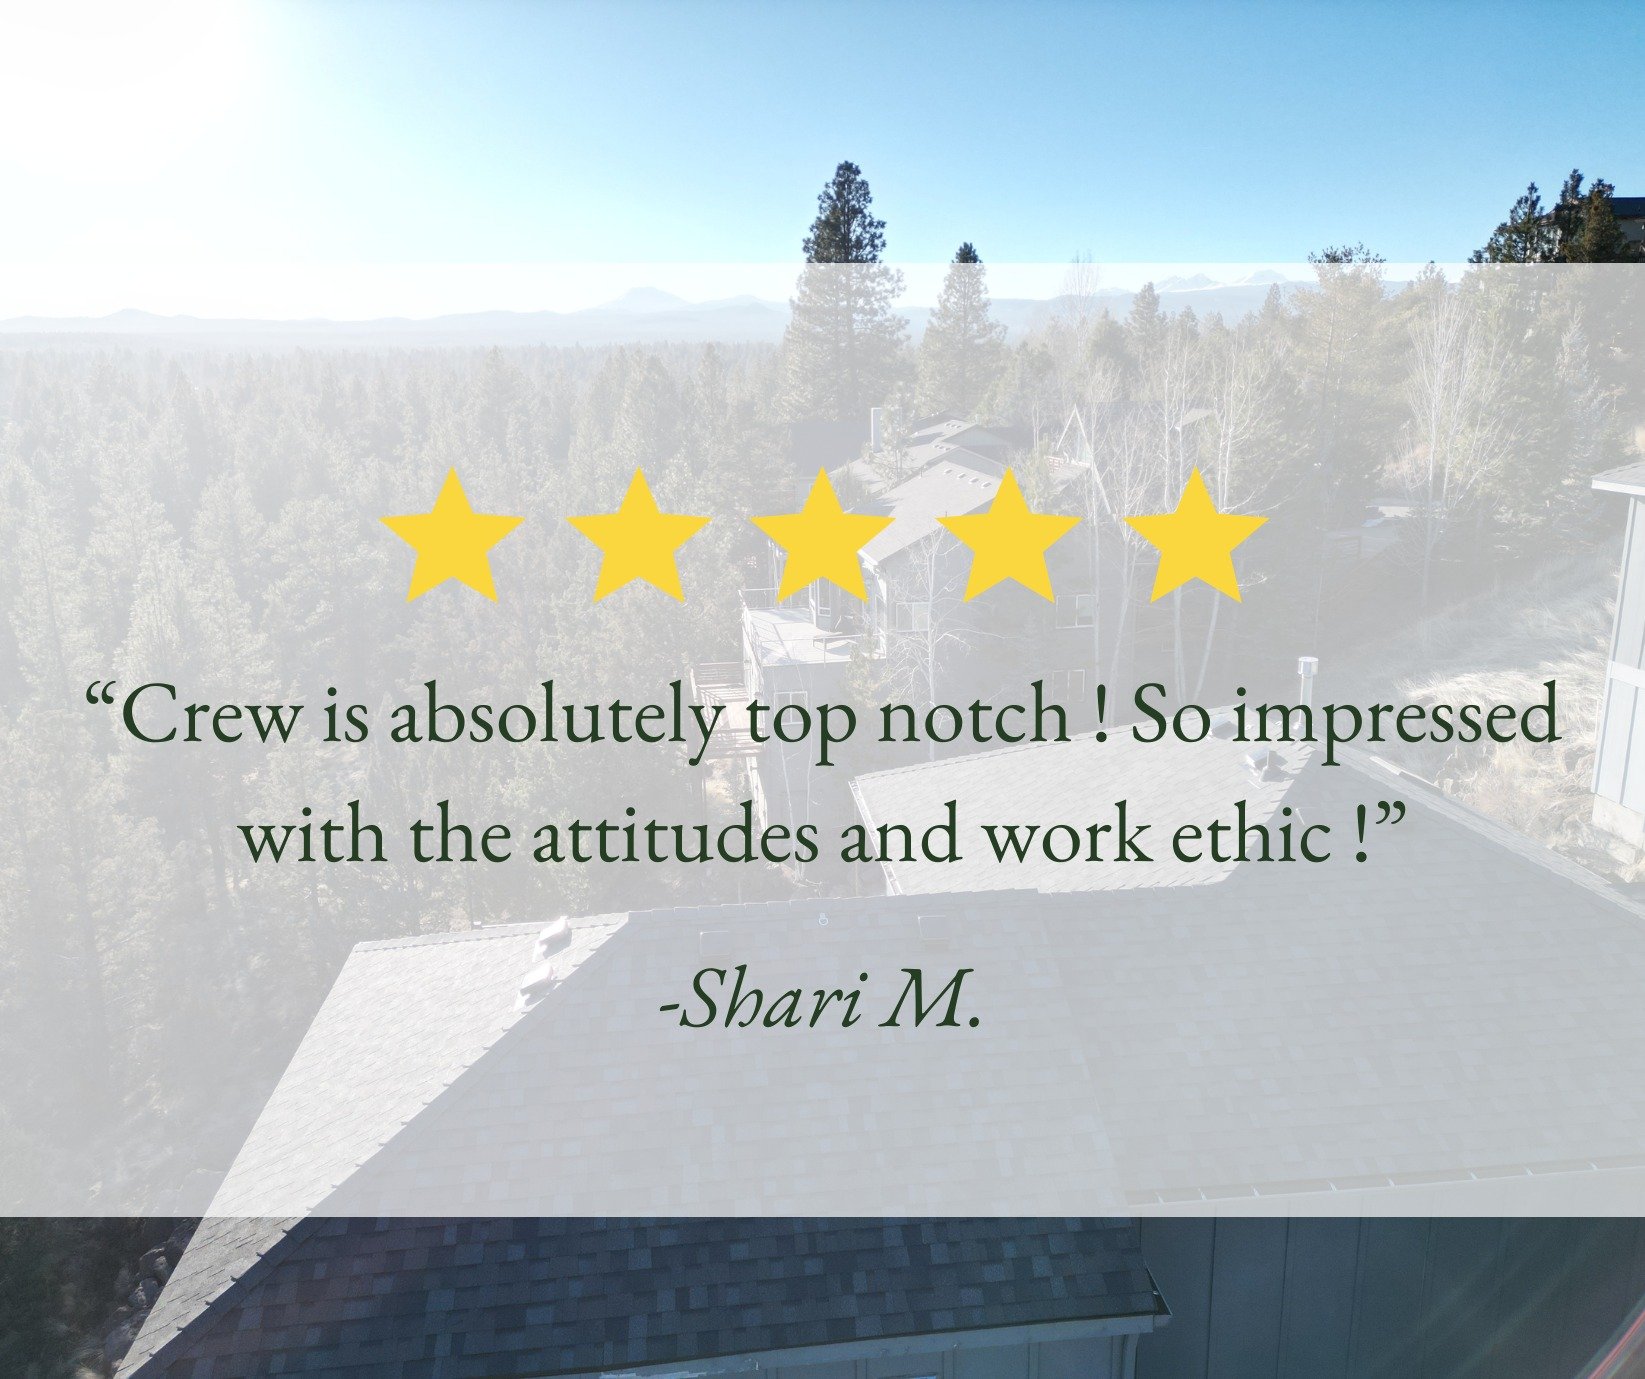 On the fence about what roofing company you should use? We strongly believe that Greenlee's dedication, attention to detail, and care for our customers sets us apart but don't take our word for it! Check out our Google reviews!